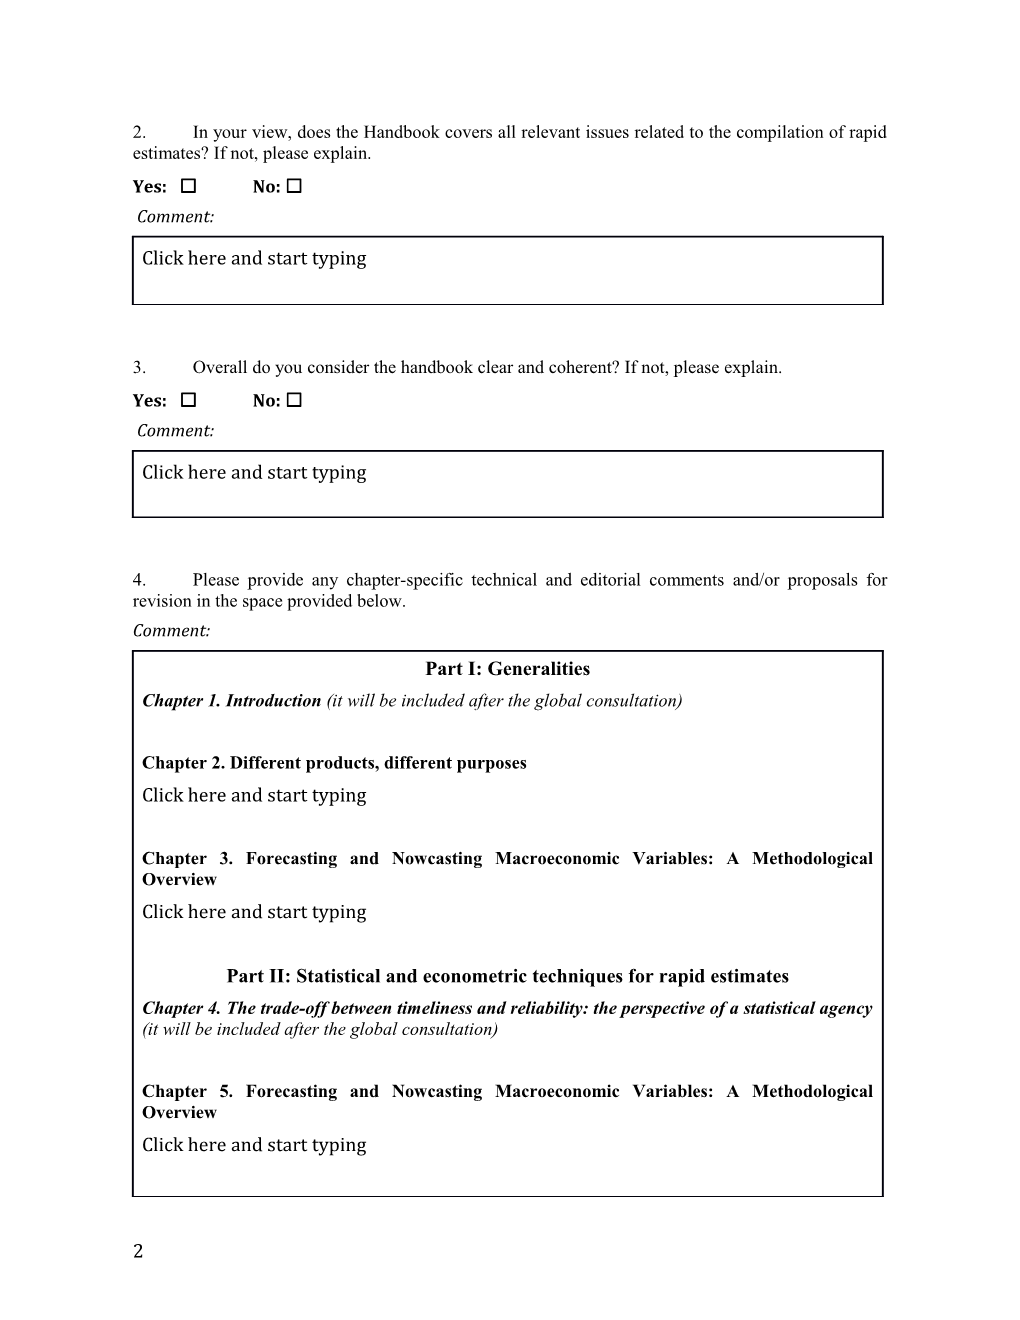 Questionnaire on the Guide